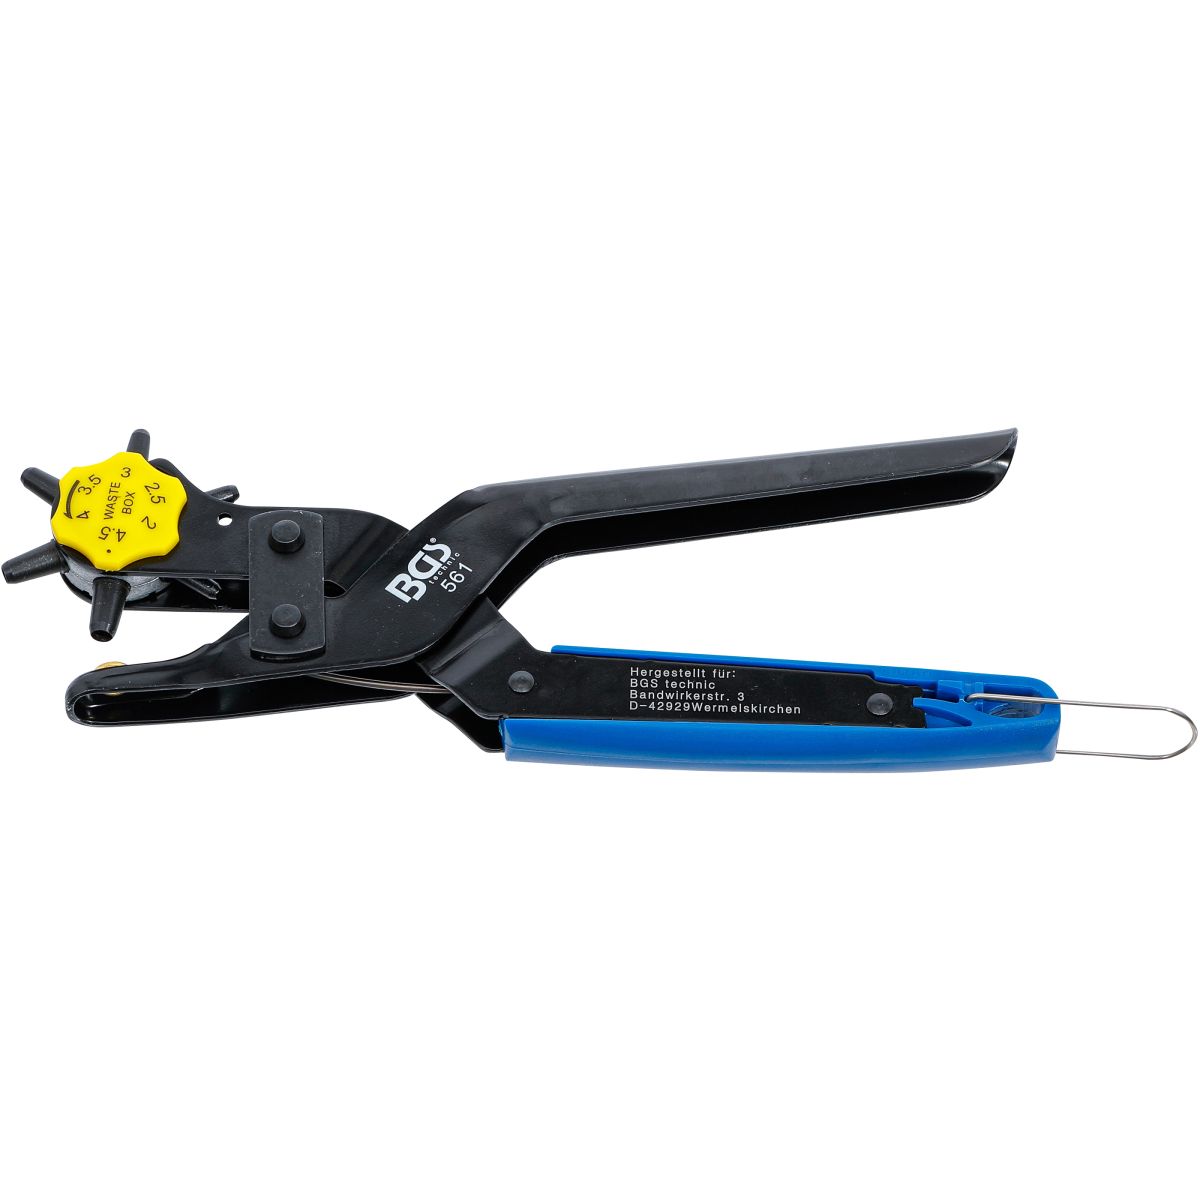 Revolving Punch Pliers with Lever Transmission